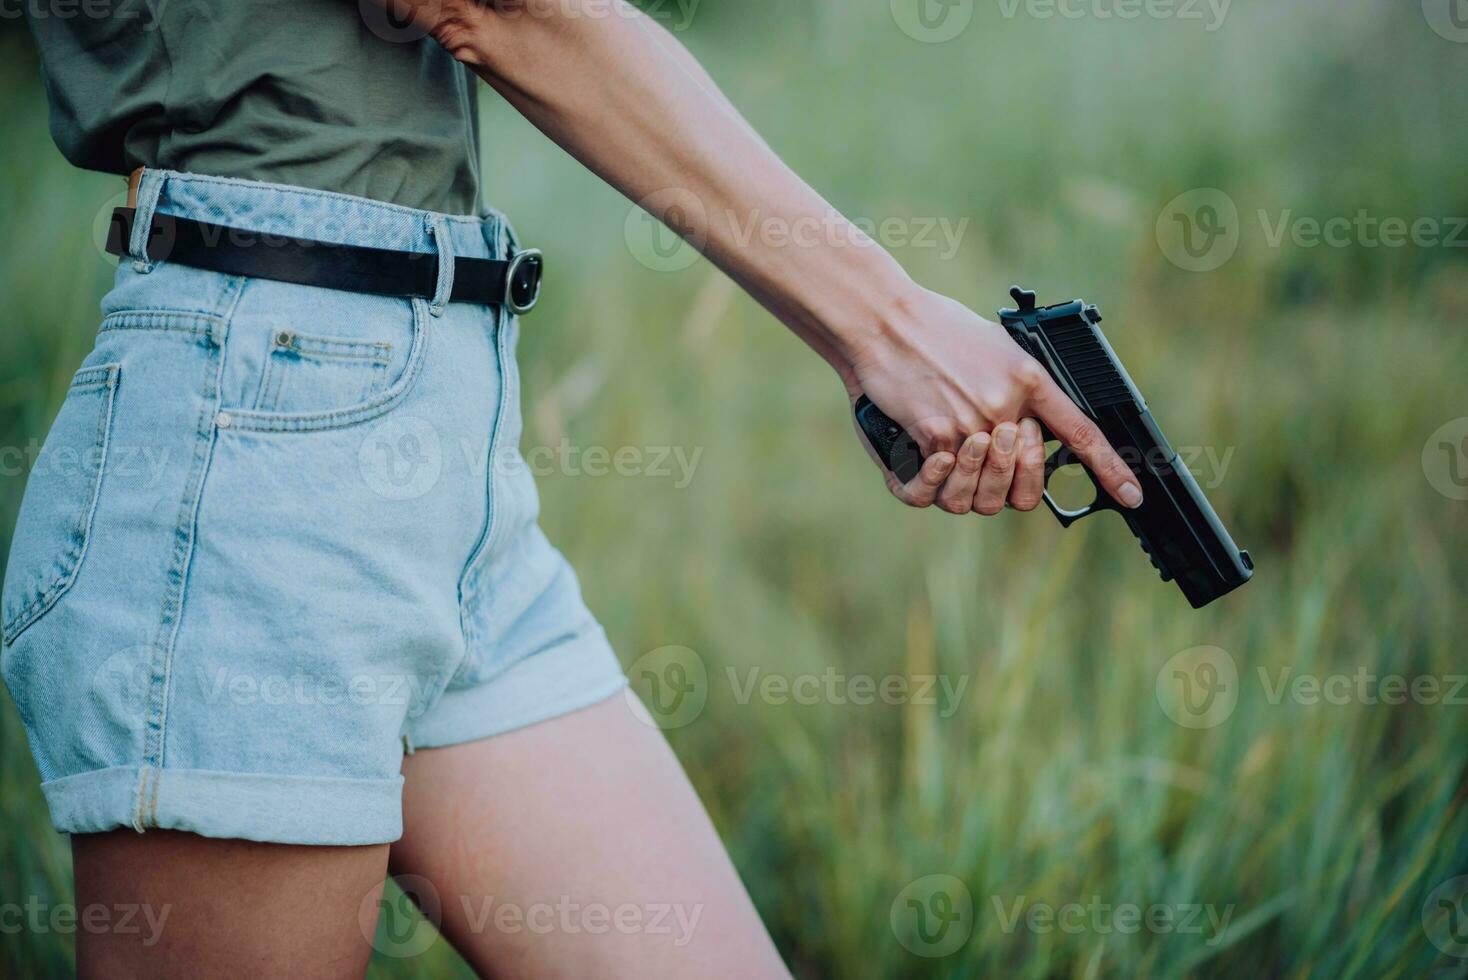 A girl in denim shorts and with a pistol in her hand poses for a photo.. Close-up photo